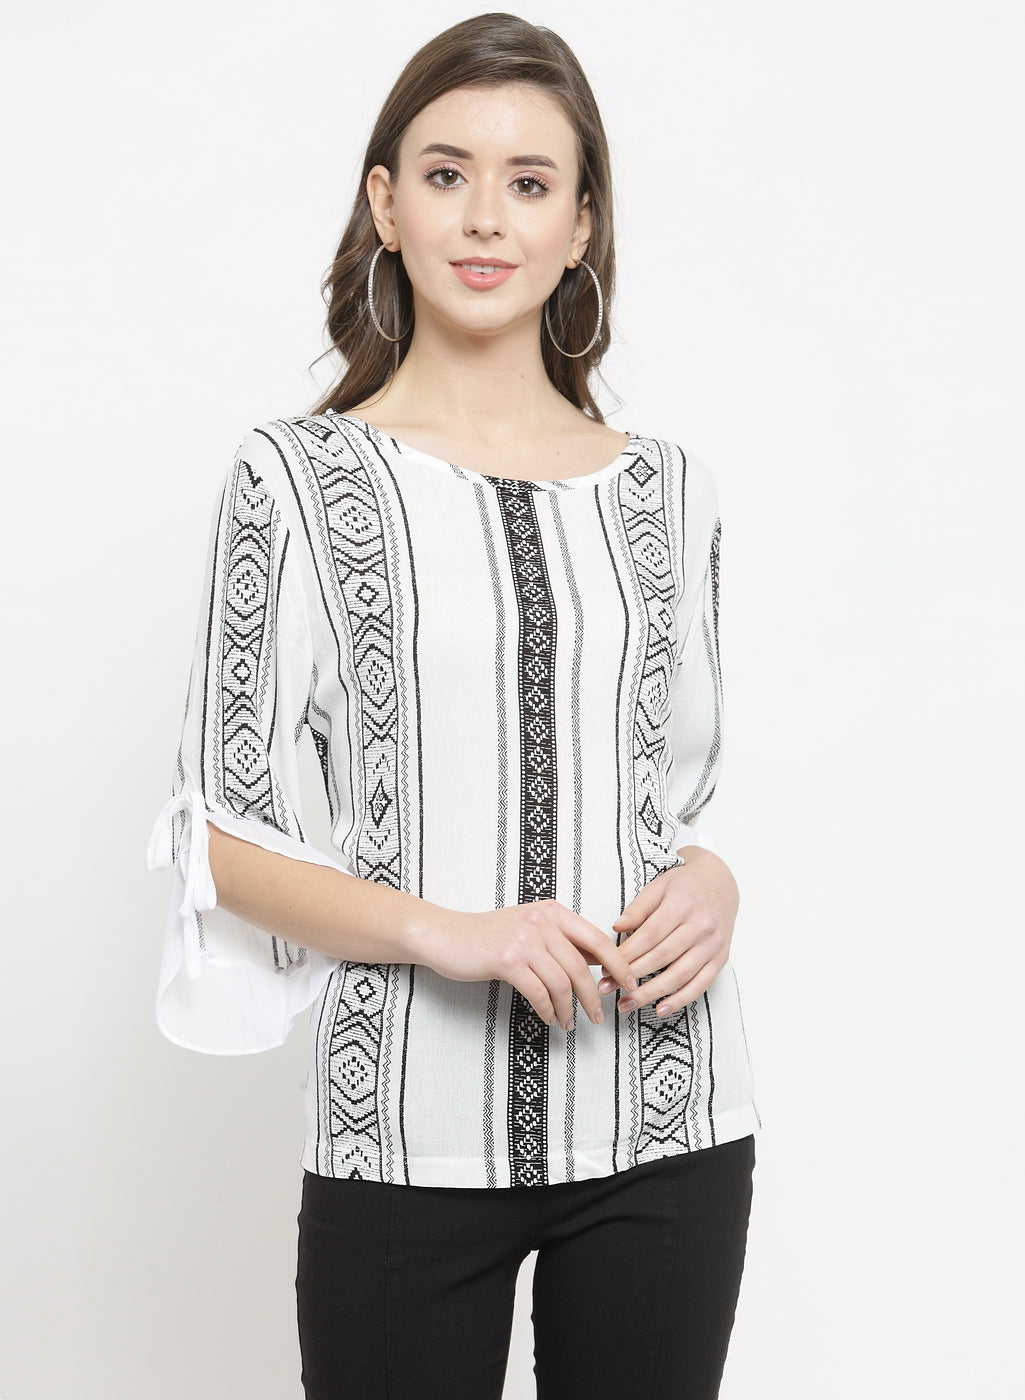 White Boat Neck Top With Printed Stripes